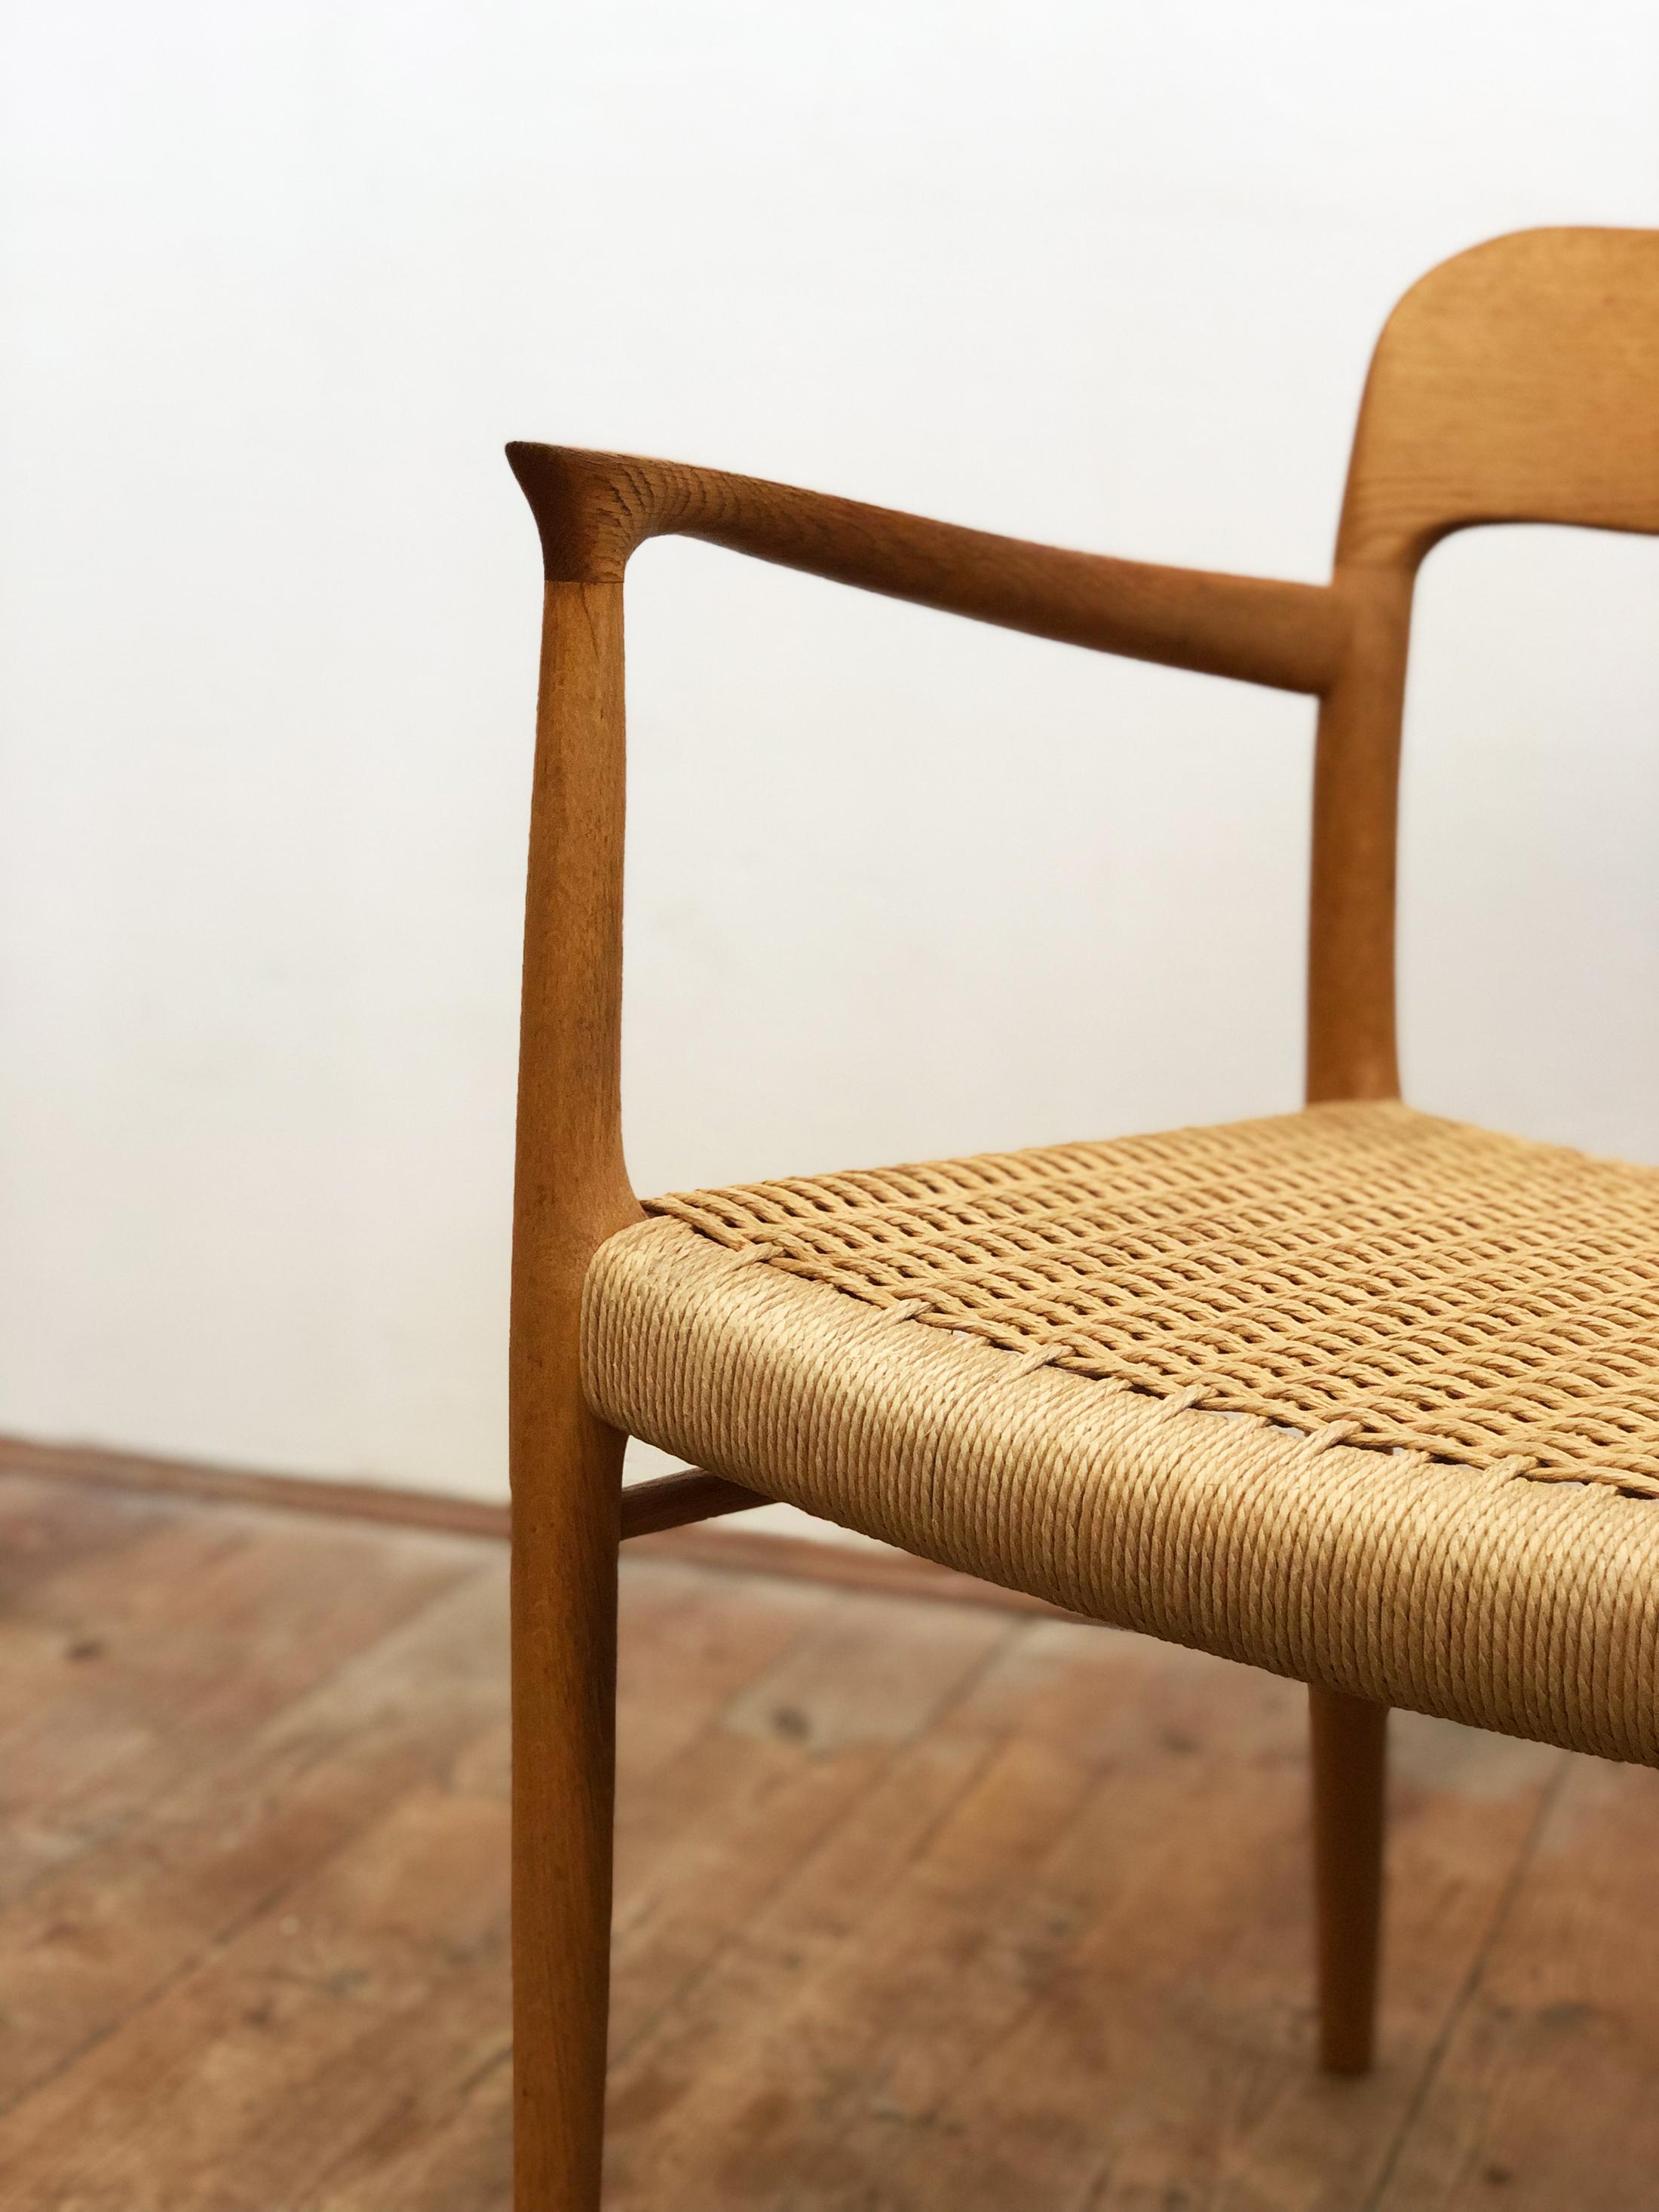 Mid-20th Century Midcentury Oak Dining Chairs, Model 56 by Niels O. Møller with Paper Cord Seats